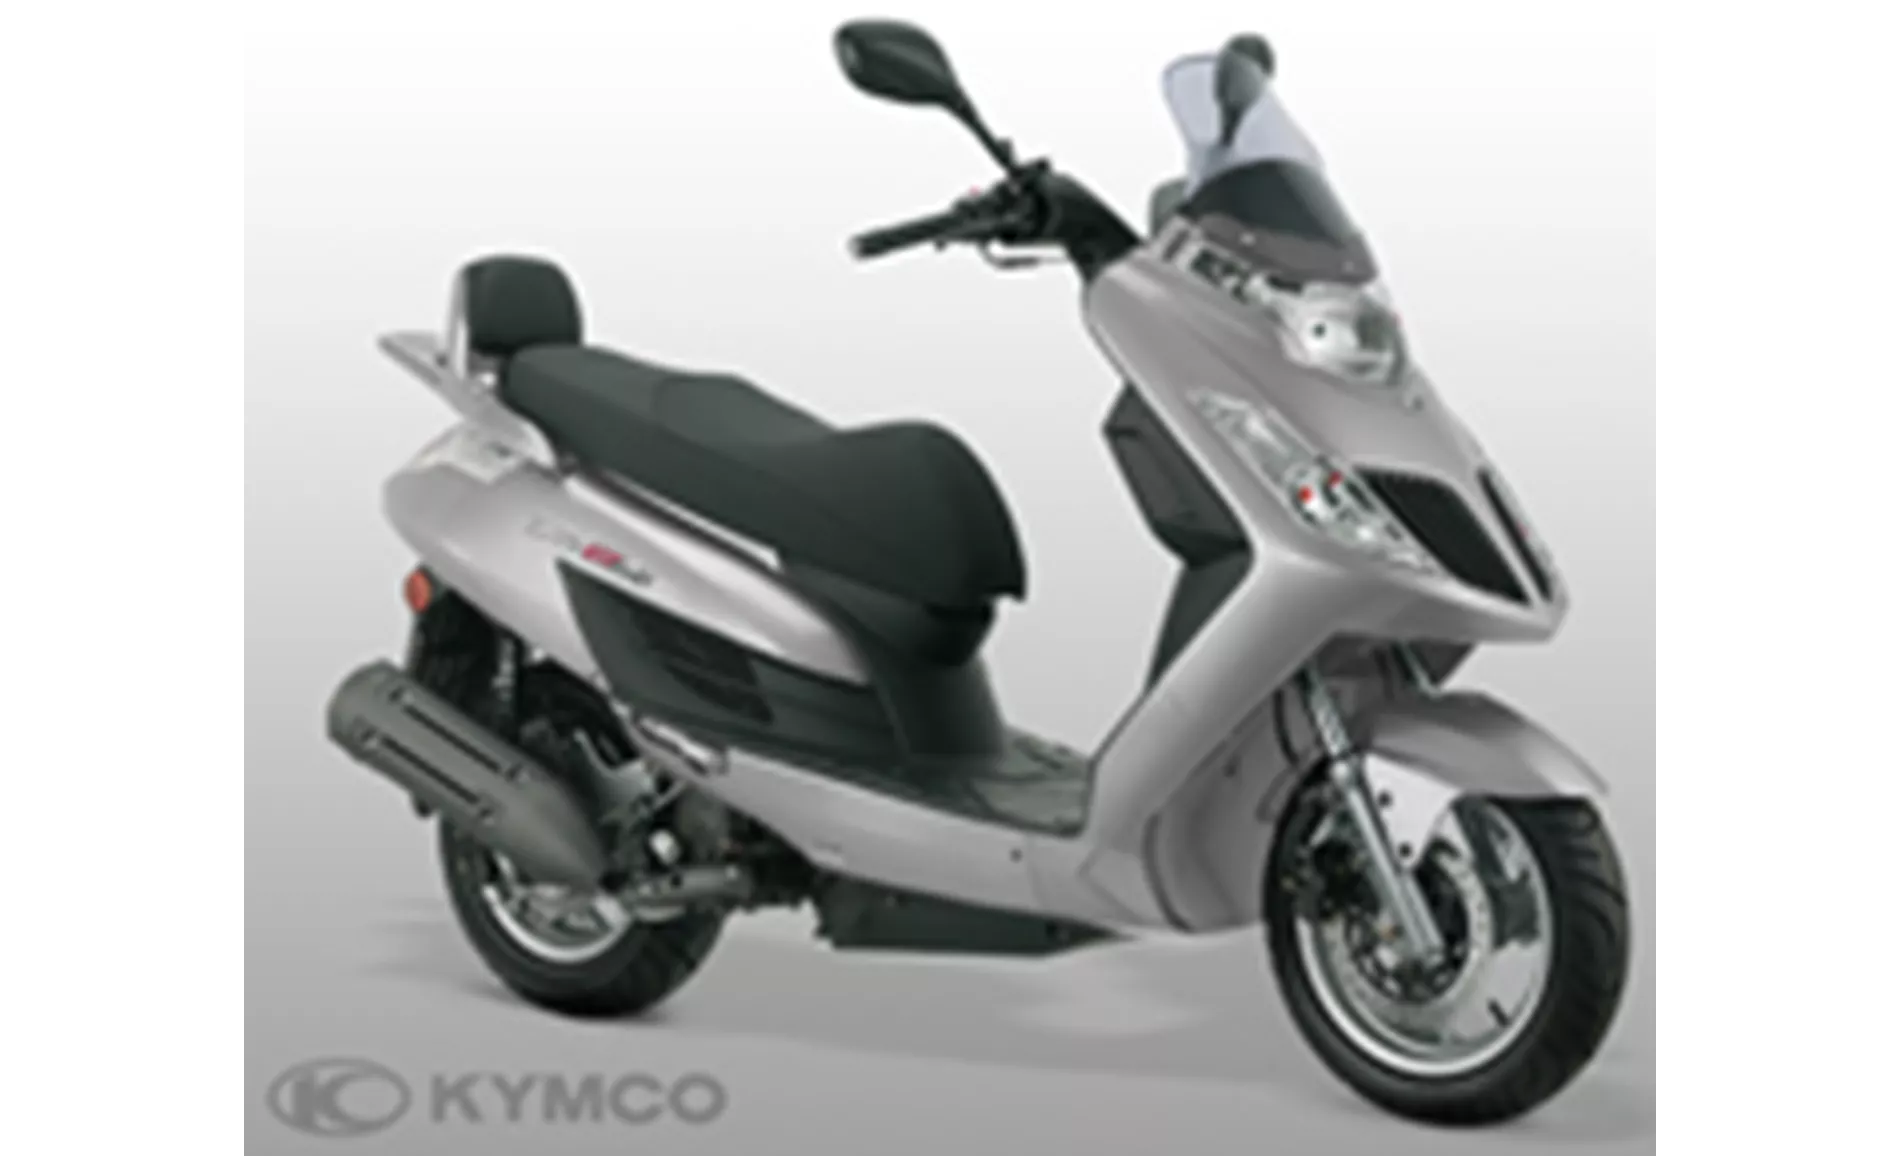 Kymco Yager GT 125 2012